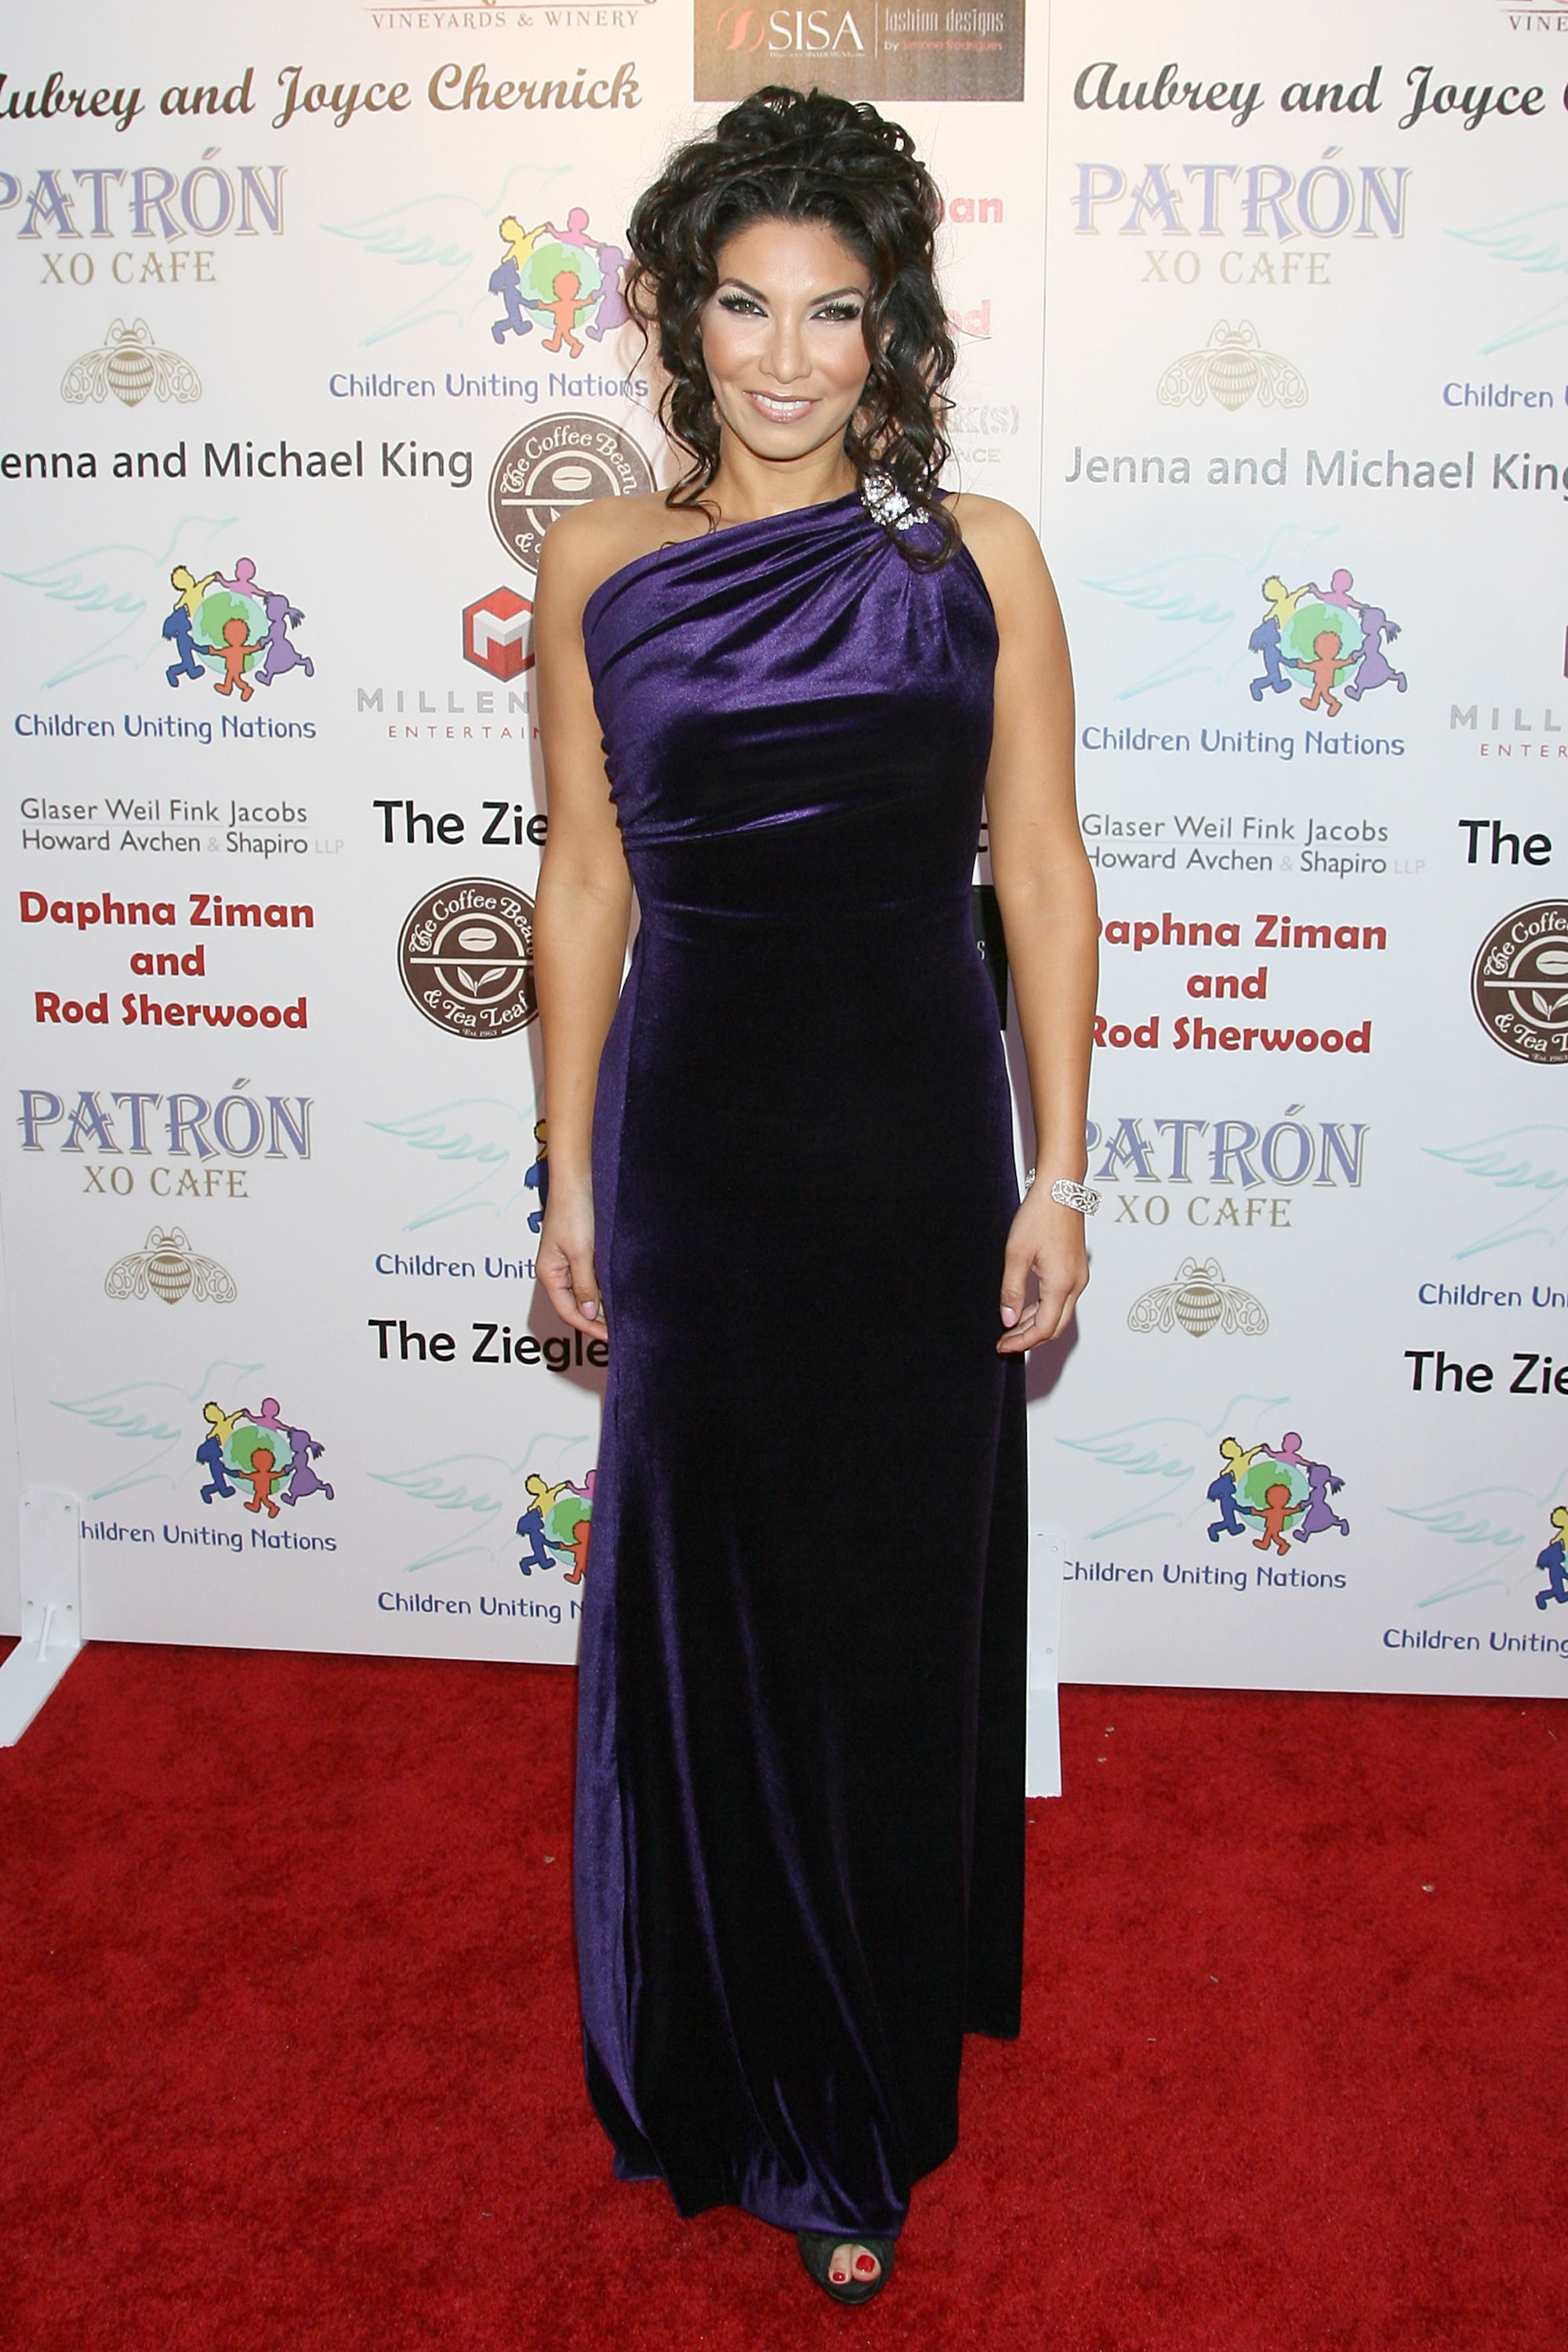 BEVERLY HILLS, CA - FEBRUARY 26: Crystal Santos attends the Children Uniting Nations Oscar Viewing Party Fundraiser on February 26, 2012 in Beverly Hills, California.